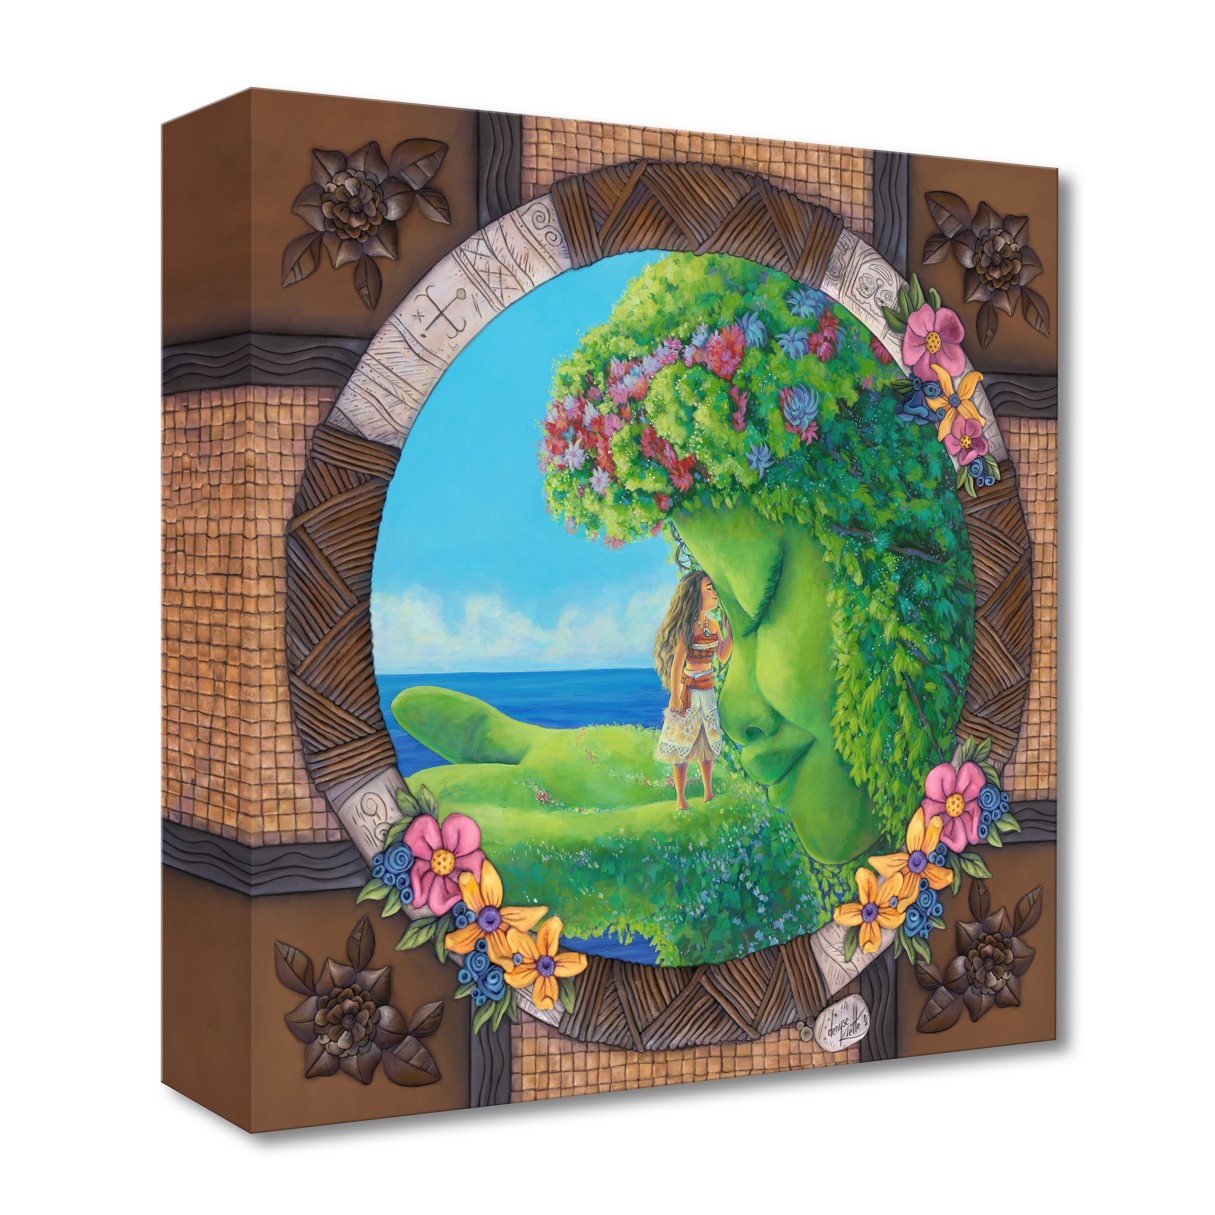 Moana ''Te Fiti'' Giclée on Canvas by Denyse Klette – Limited Edition